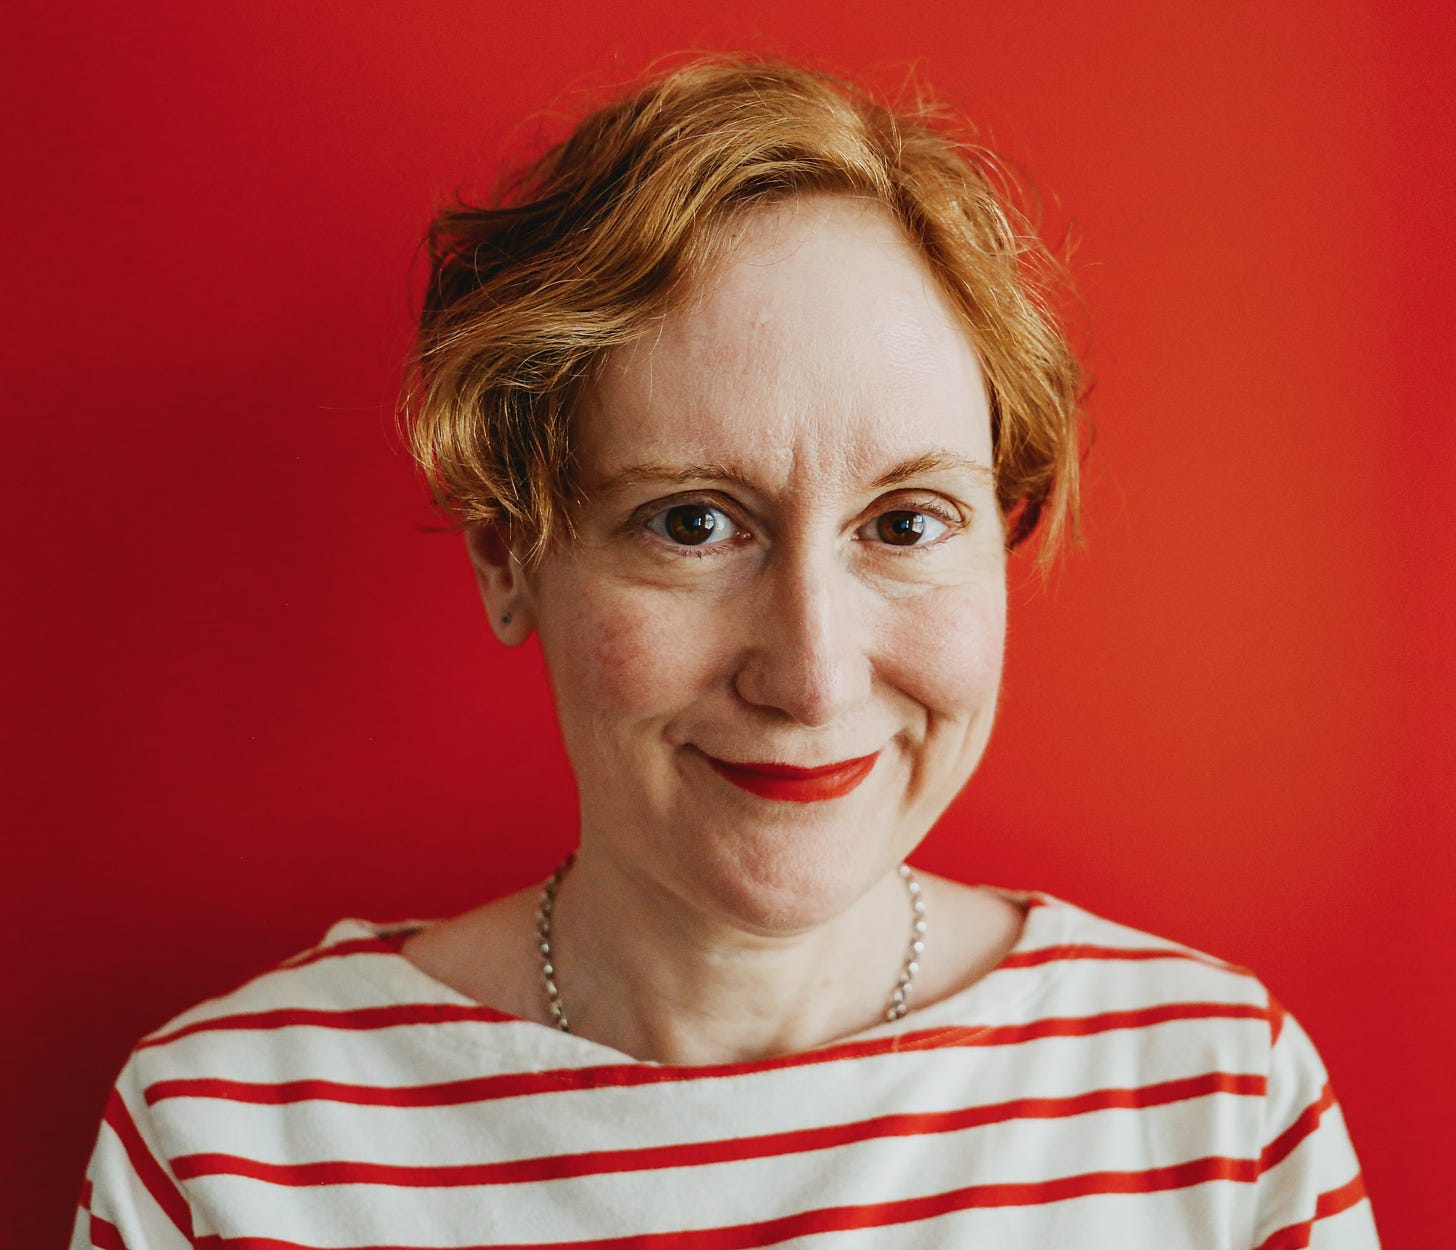 Woman with red hair wearing a striped shirt against a red background